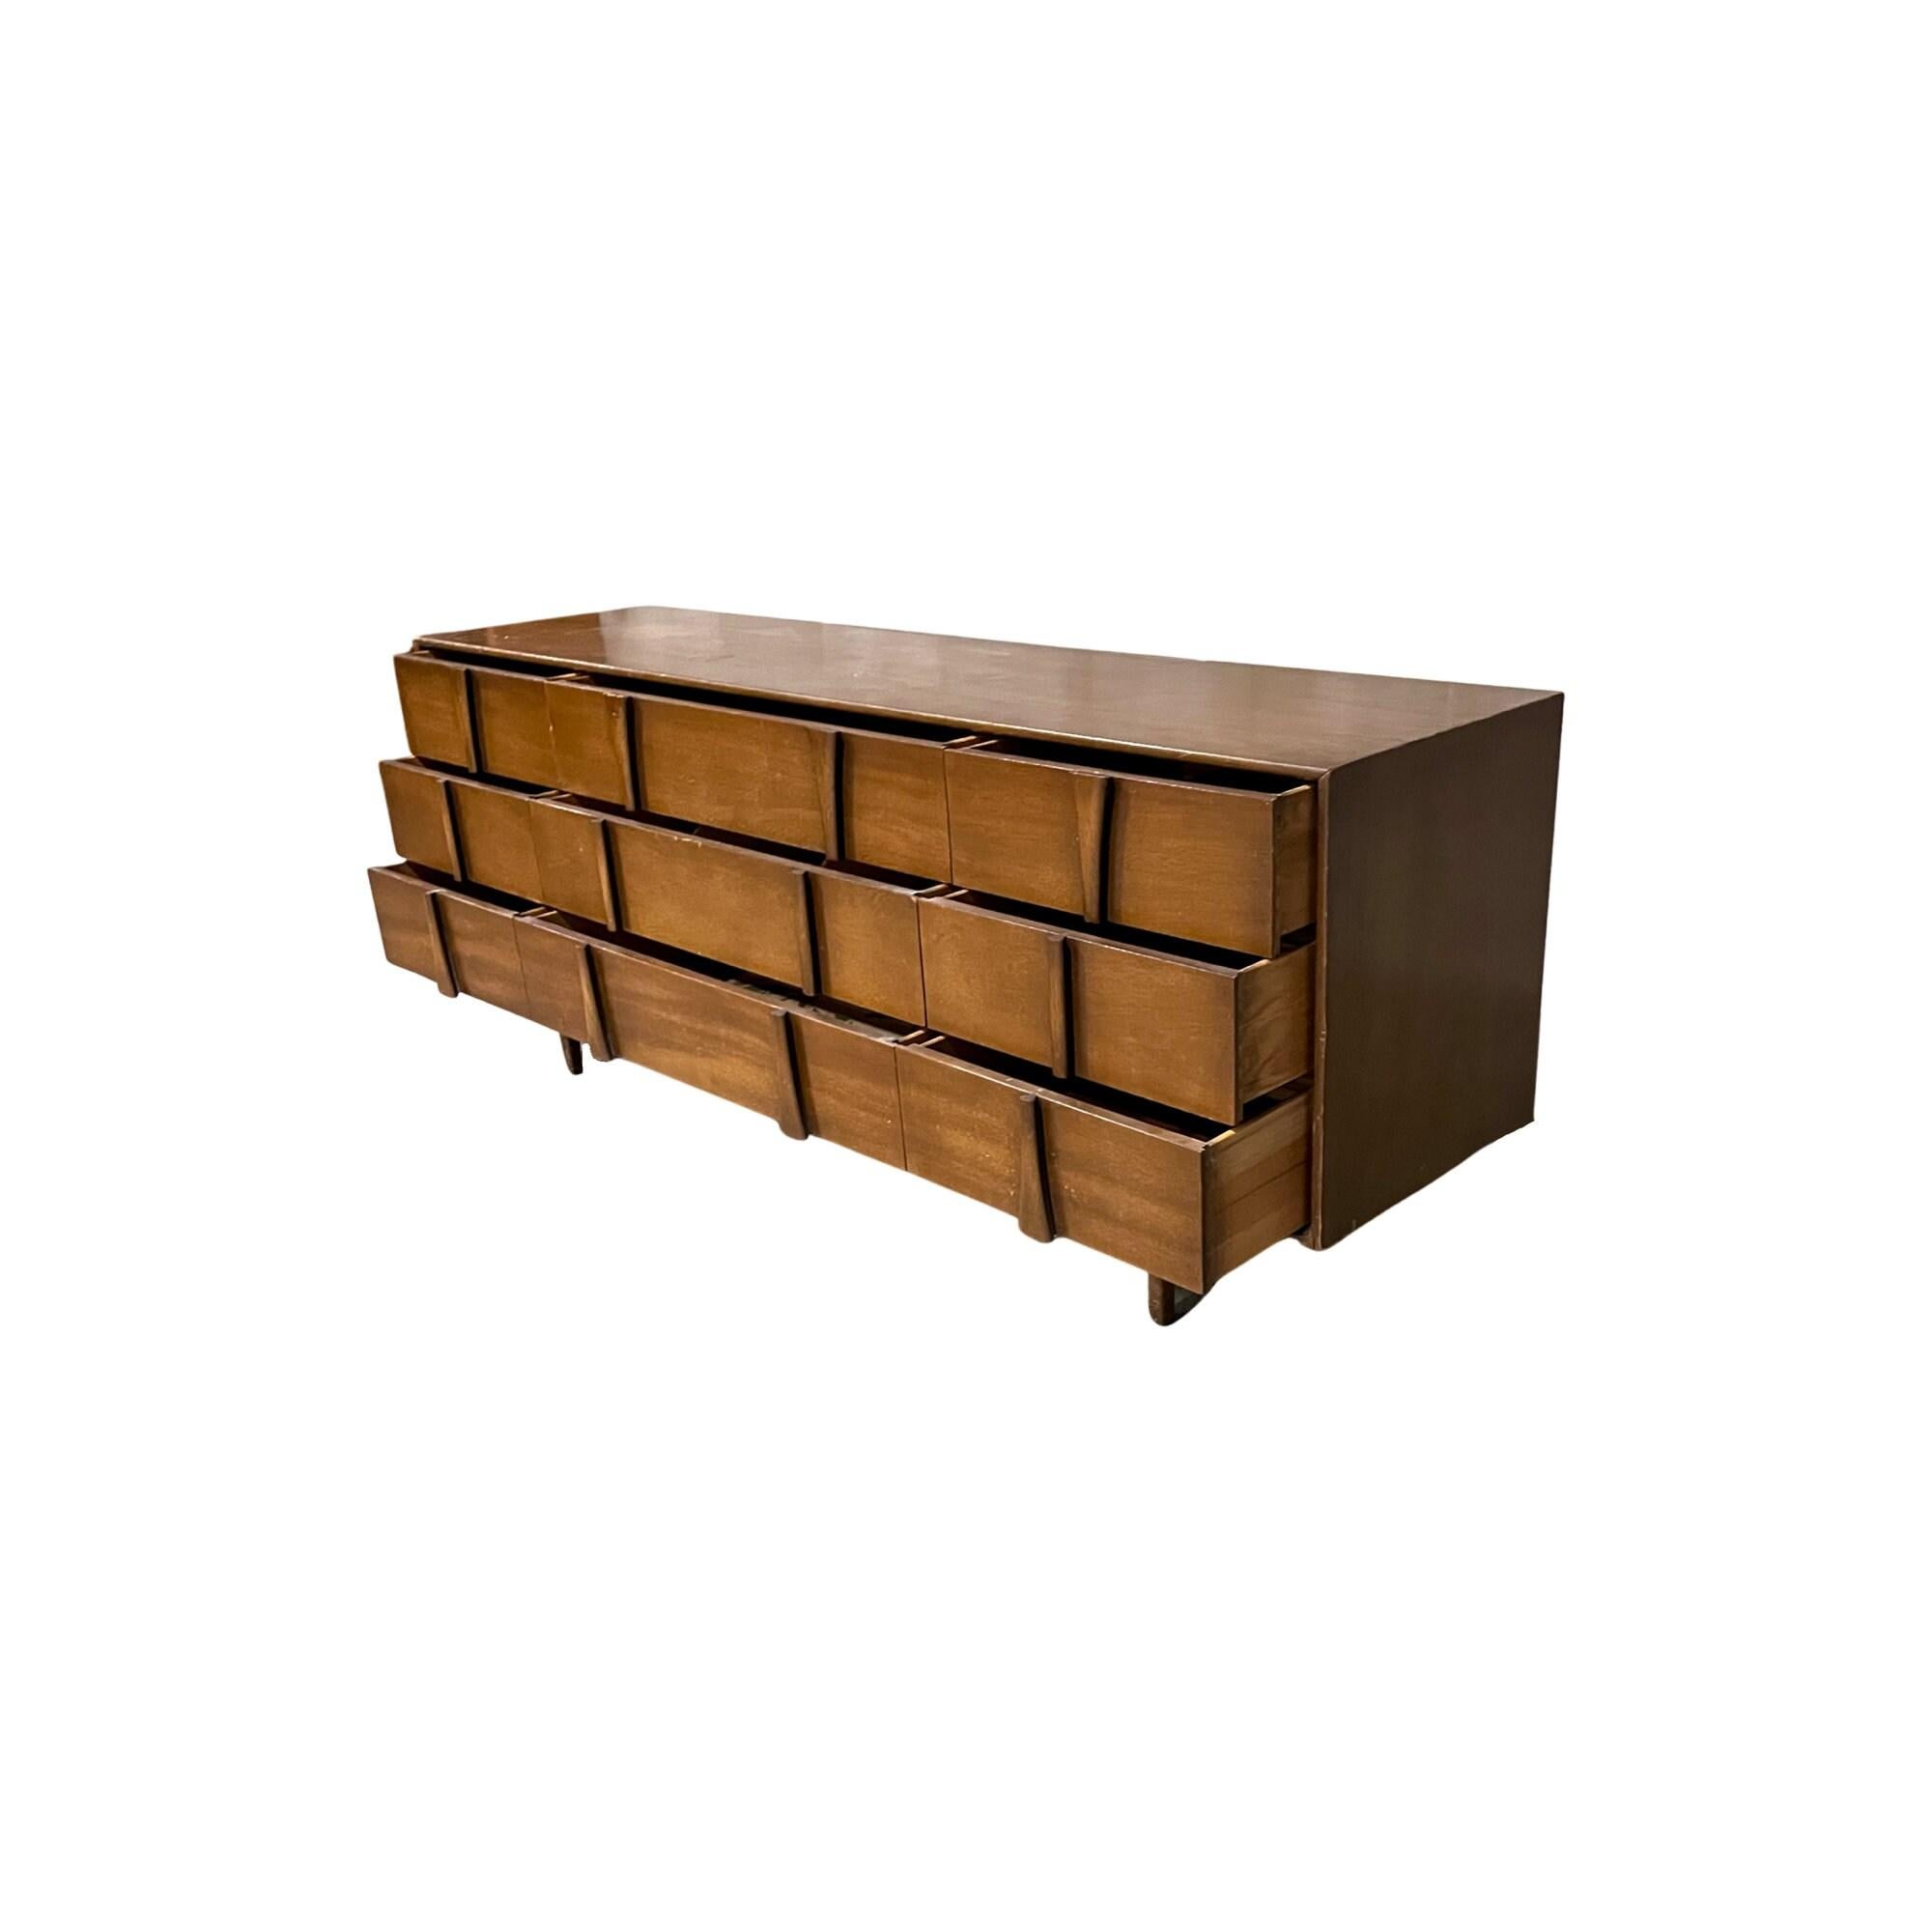 Check out this generously proportioned dresser, stretching an impressive 78 inches long and accommodating nine drawers. Crafted with utmost artistry, this vintage 1960s mid-century modern triple dresser showcases exquisite solid walnut sculpted